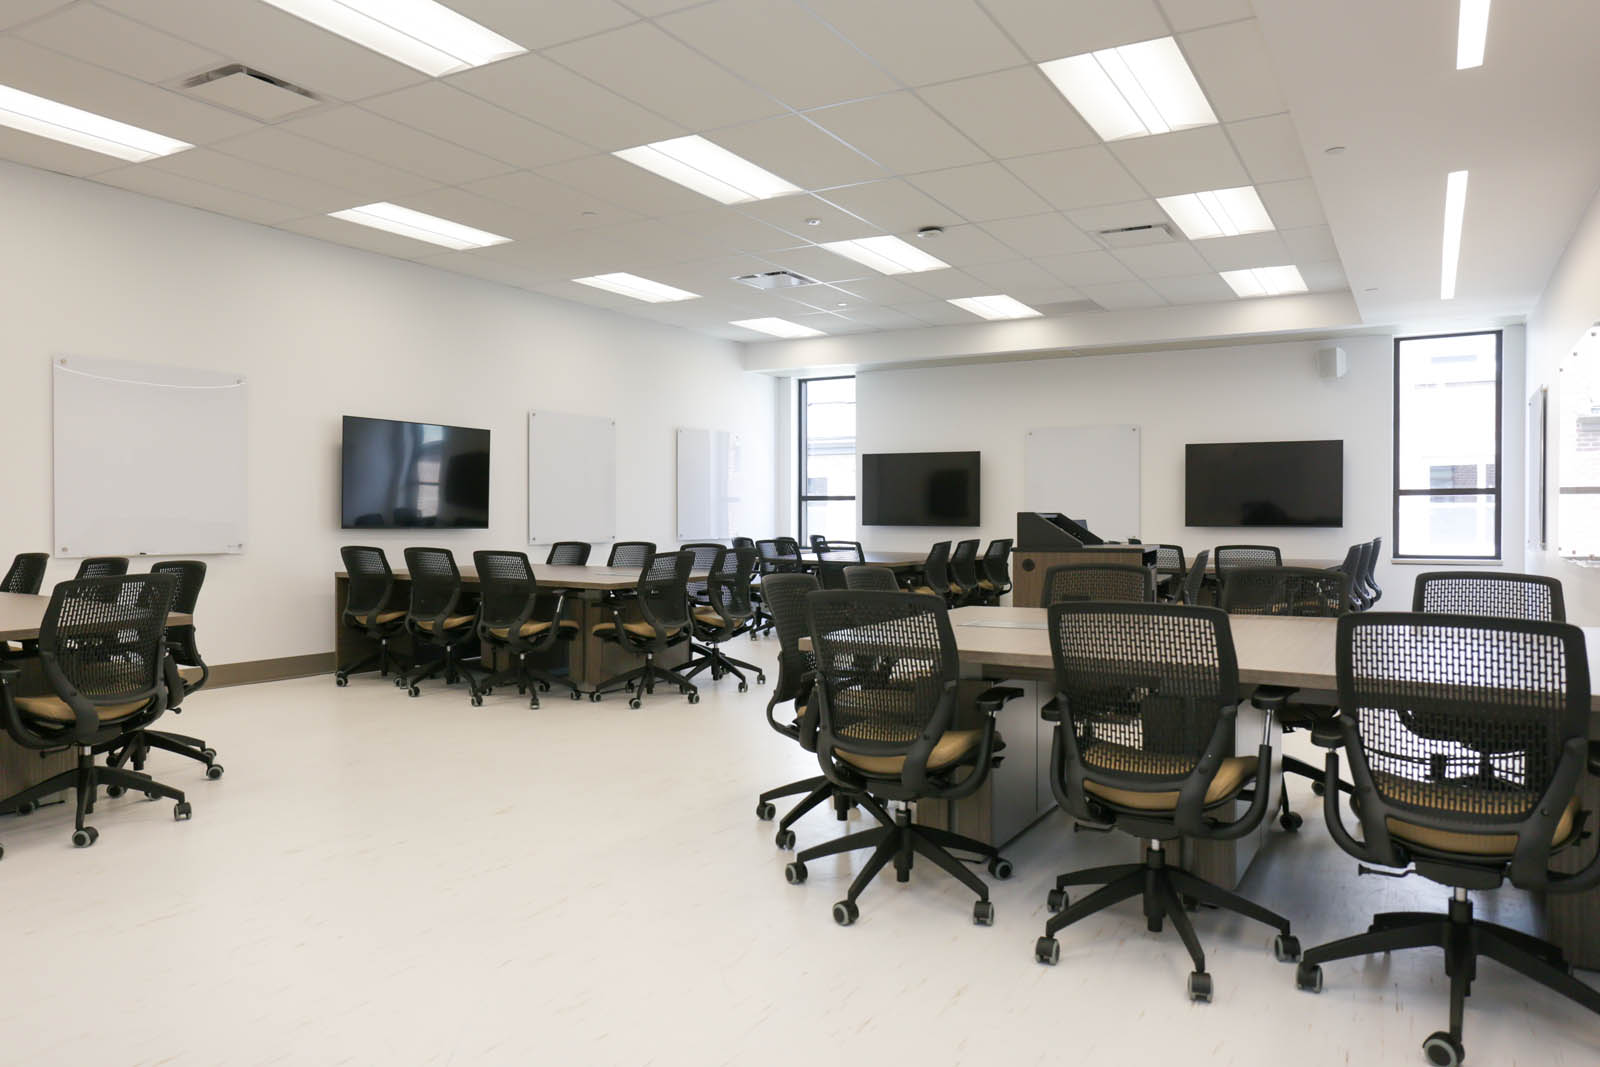 A bright classroom with several TVs and whiteboards as well as a podium and 5 tables with seating for 40 people